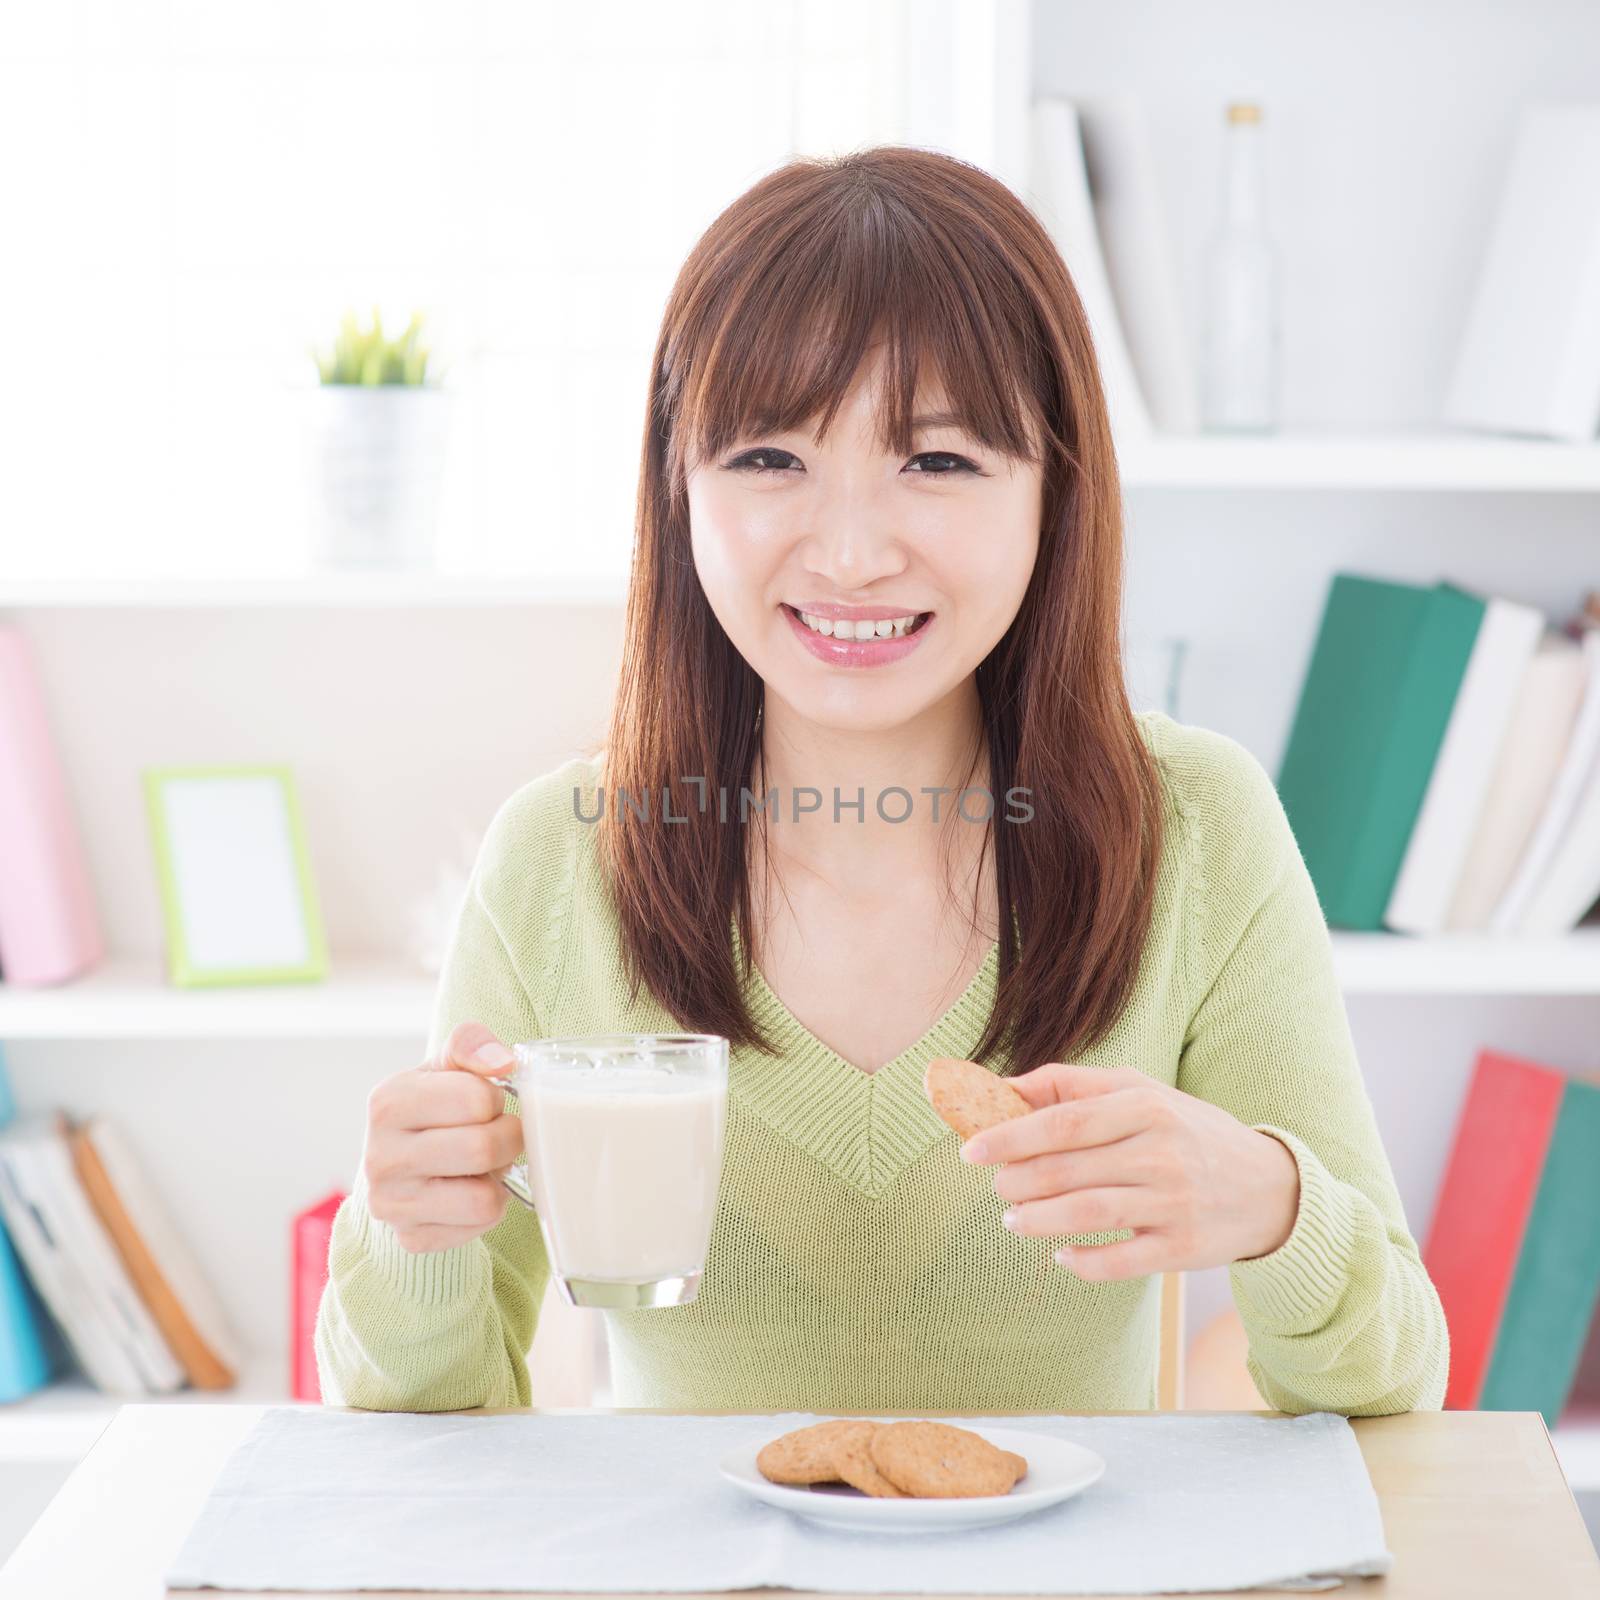 Portrait of happy Asian girl having soymilk and cookies as breakfast. Young woman indoors living lifestyle at home.